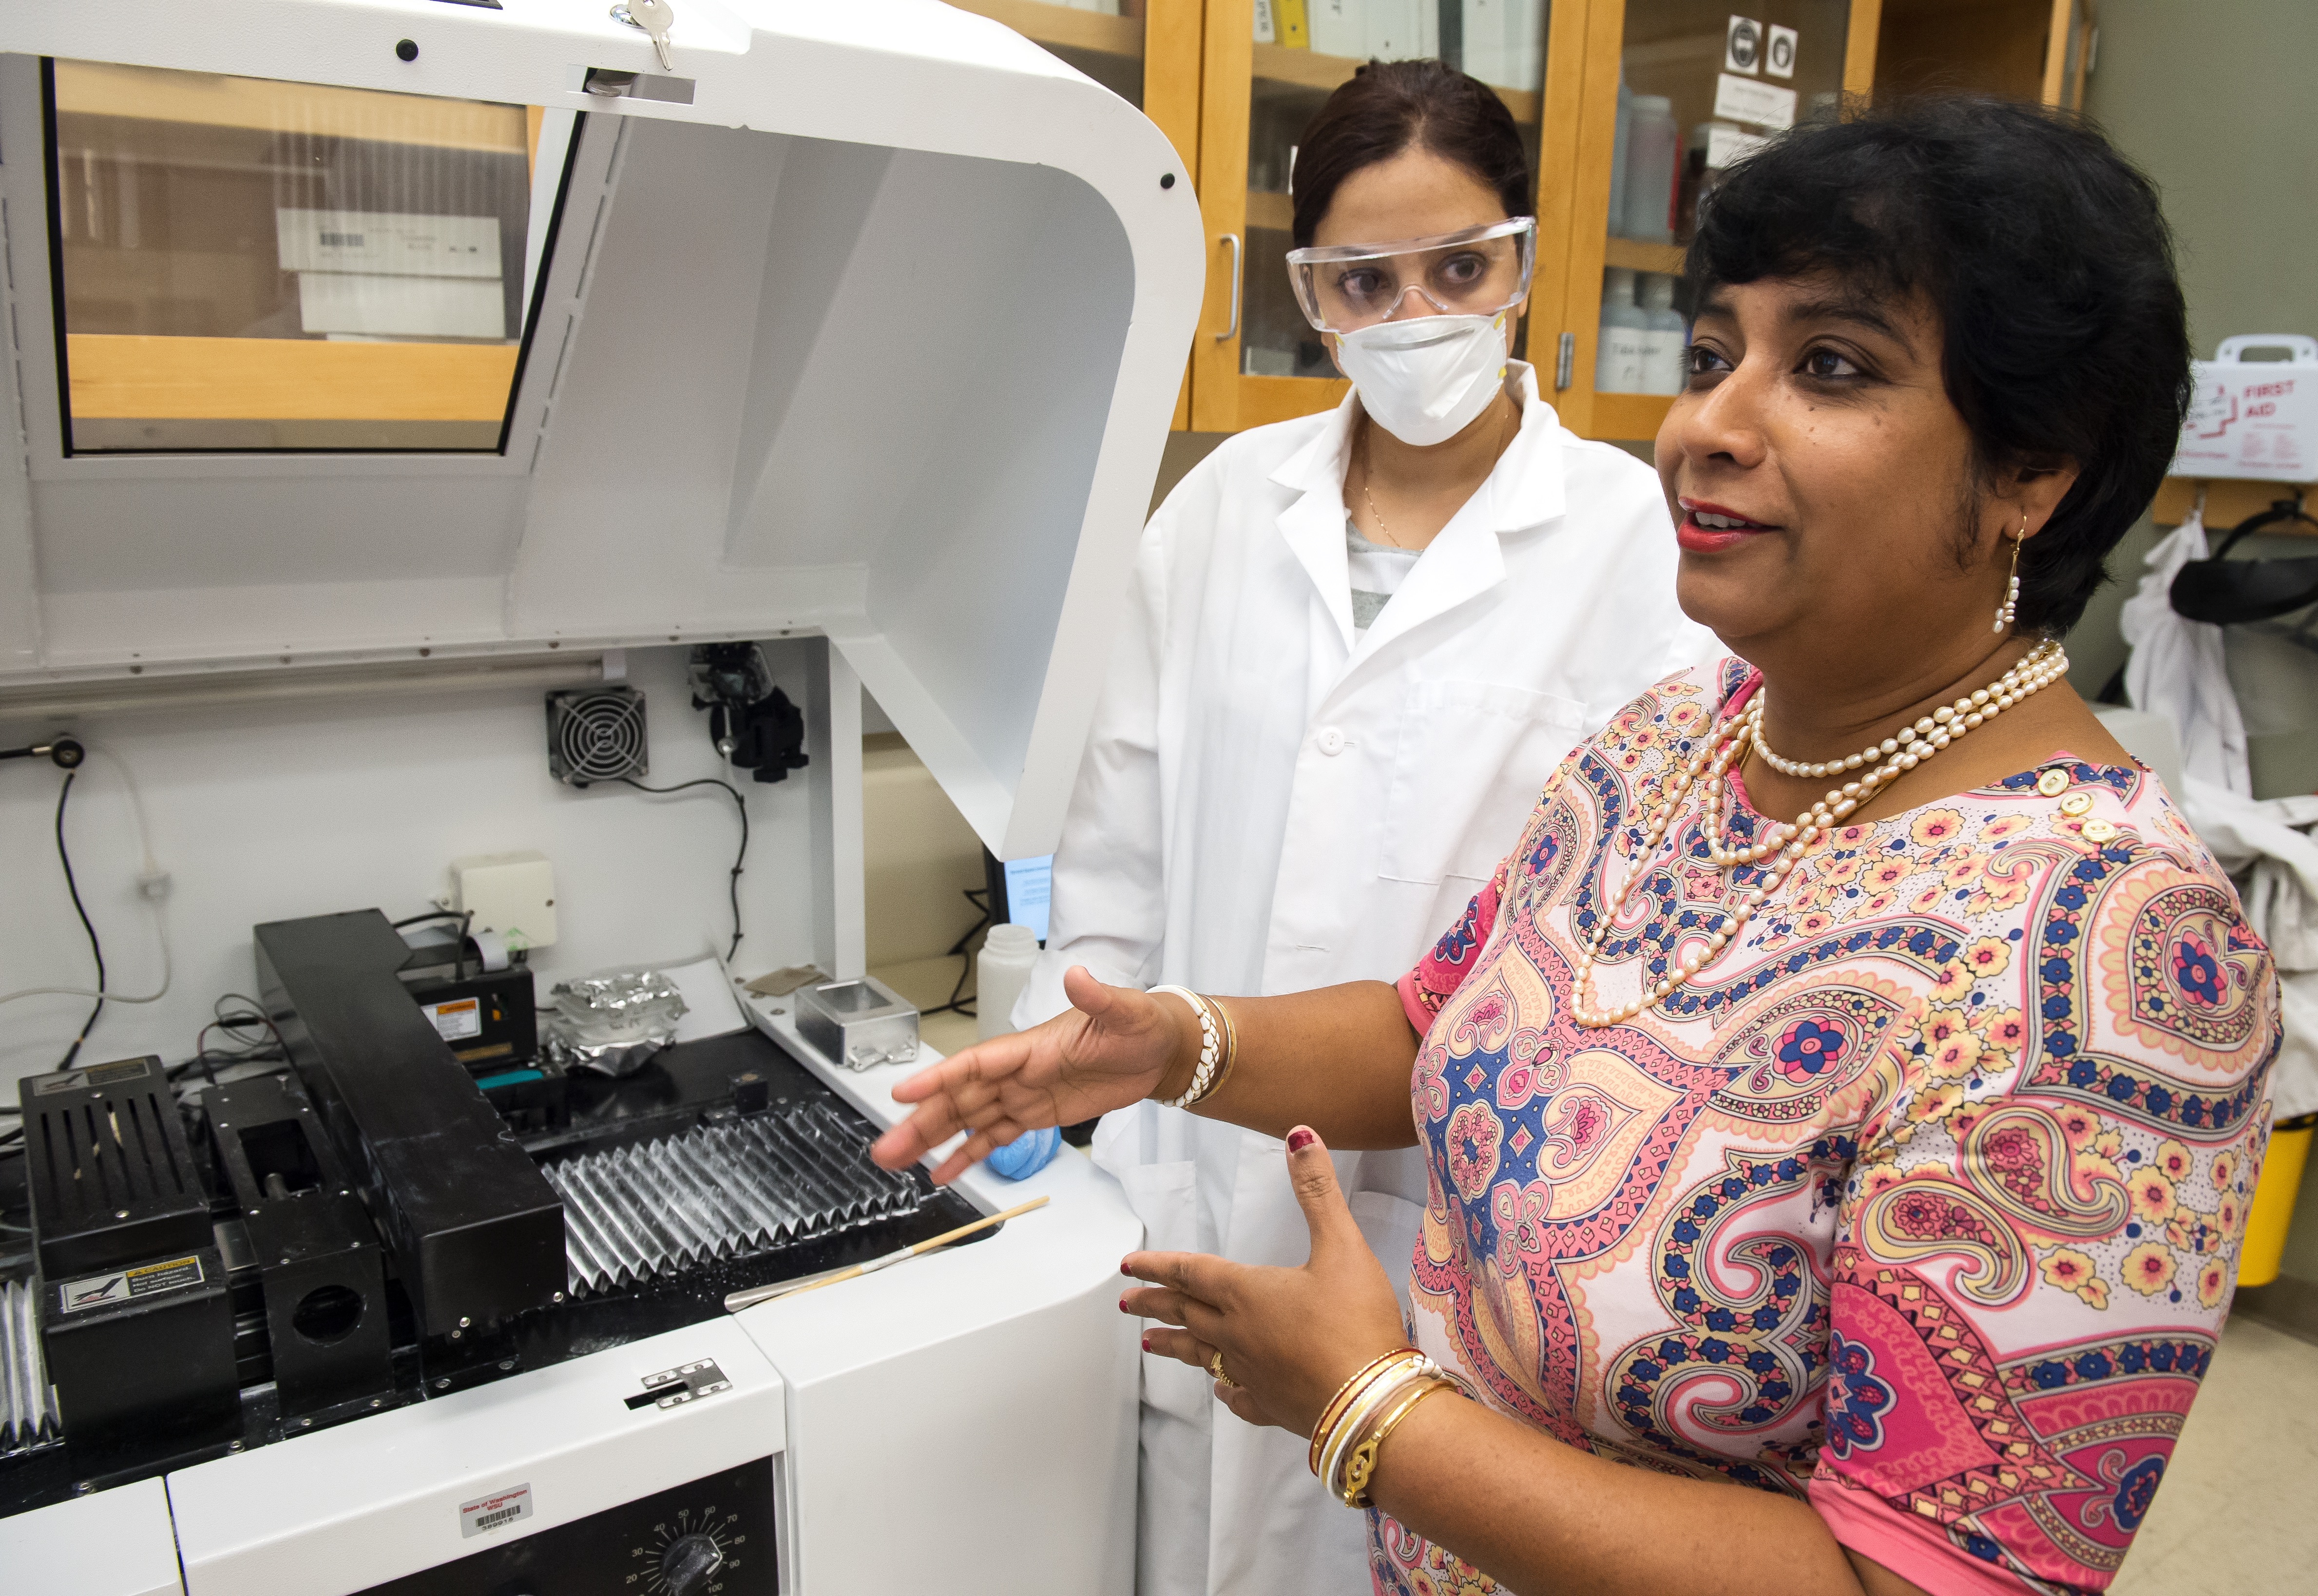 Science in your bones! Susmita Bose and the biomechanical 3-D printing she and her graduate students are researching.